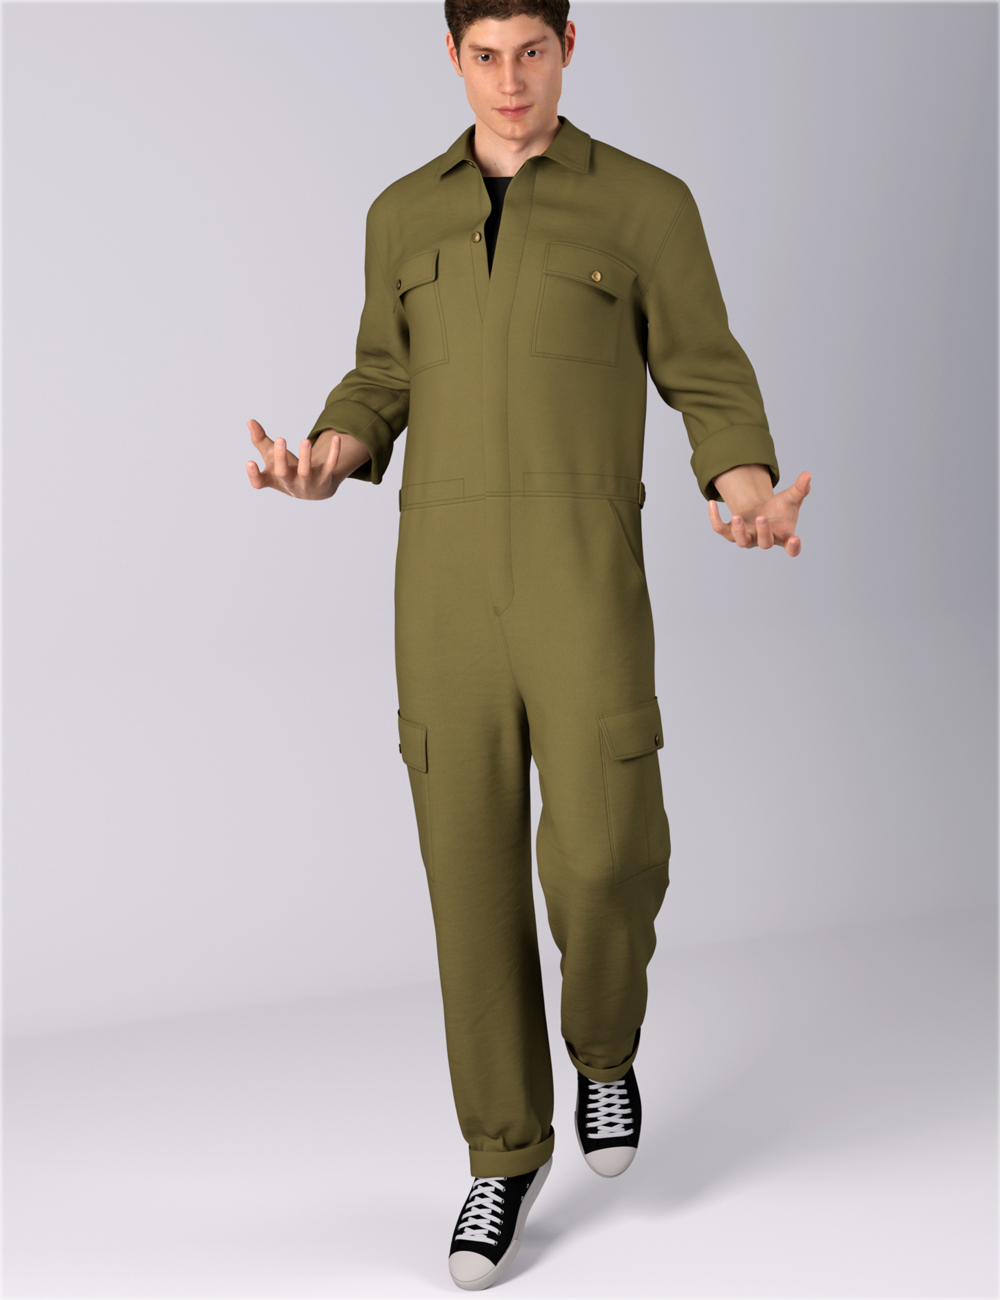 dForce HnC Loose Jumpsuit Outfit for Genesis 8.1 Males by: IH Kang, 3D Models by Daz 3D